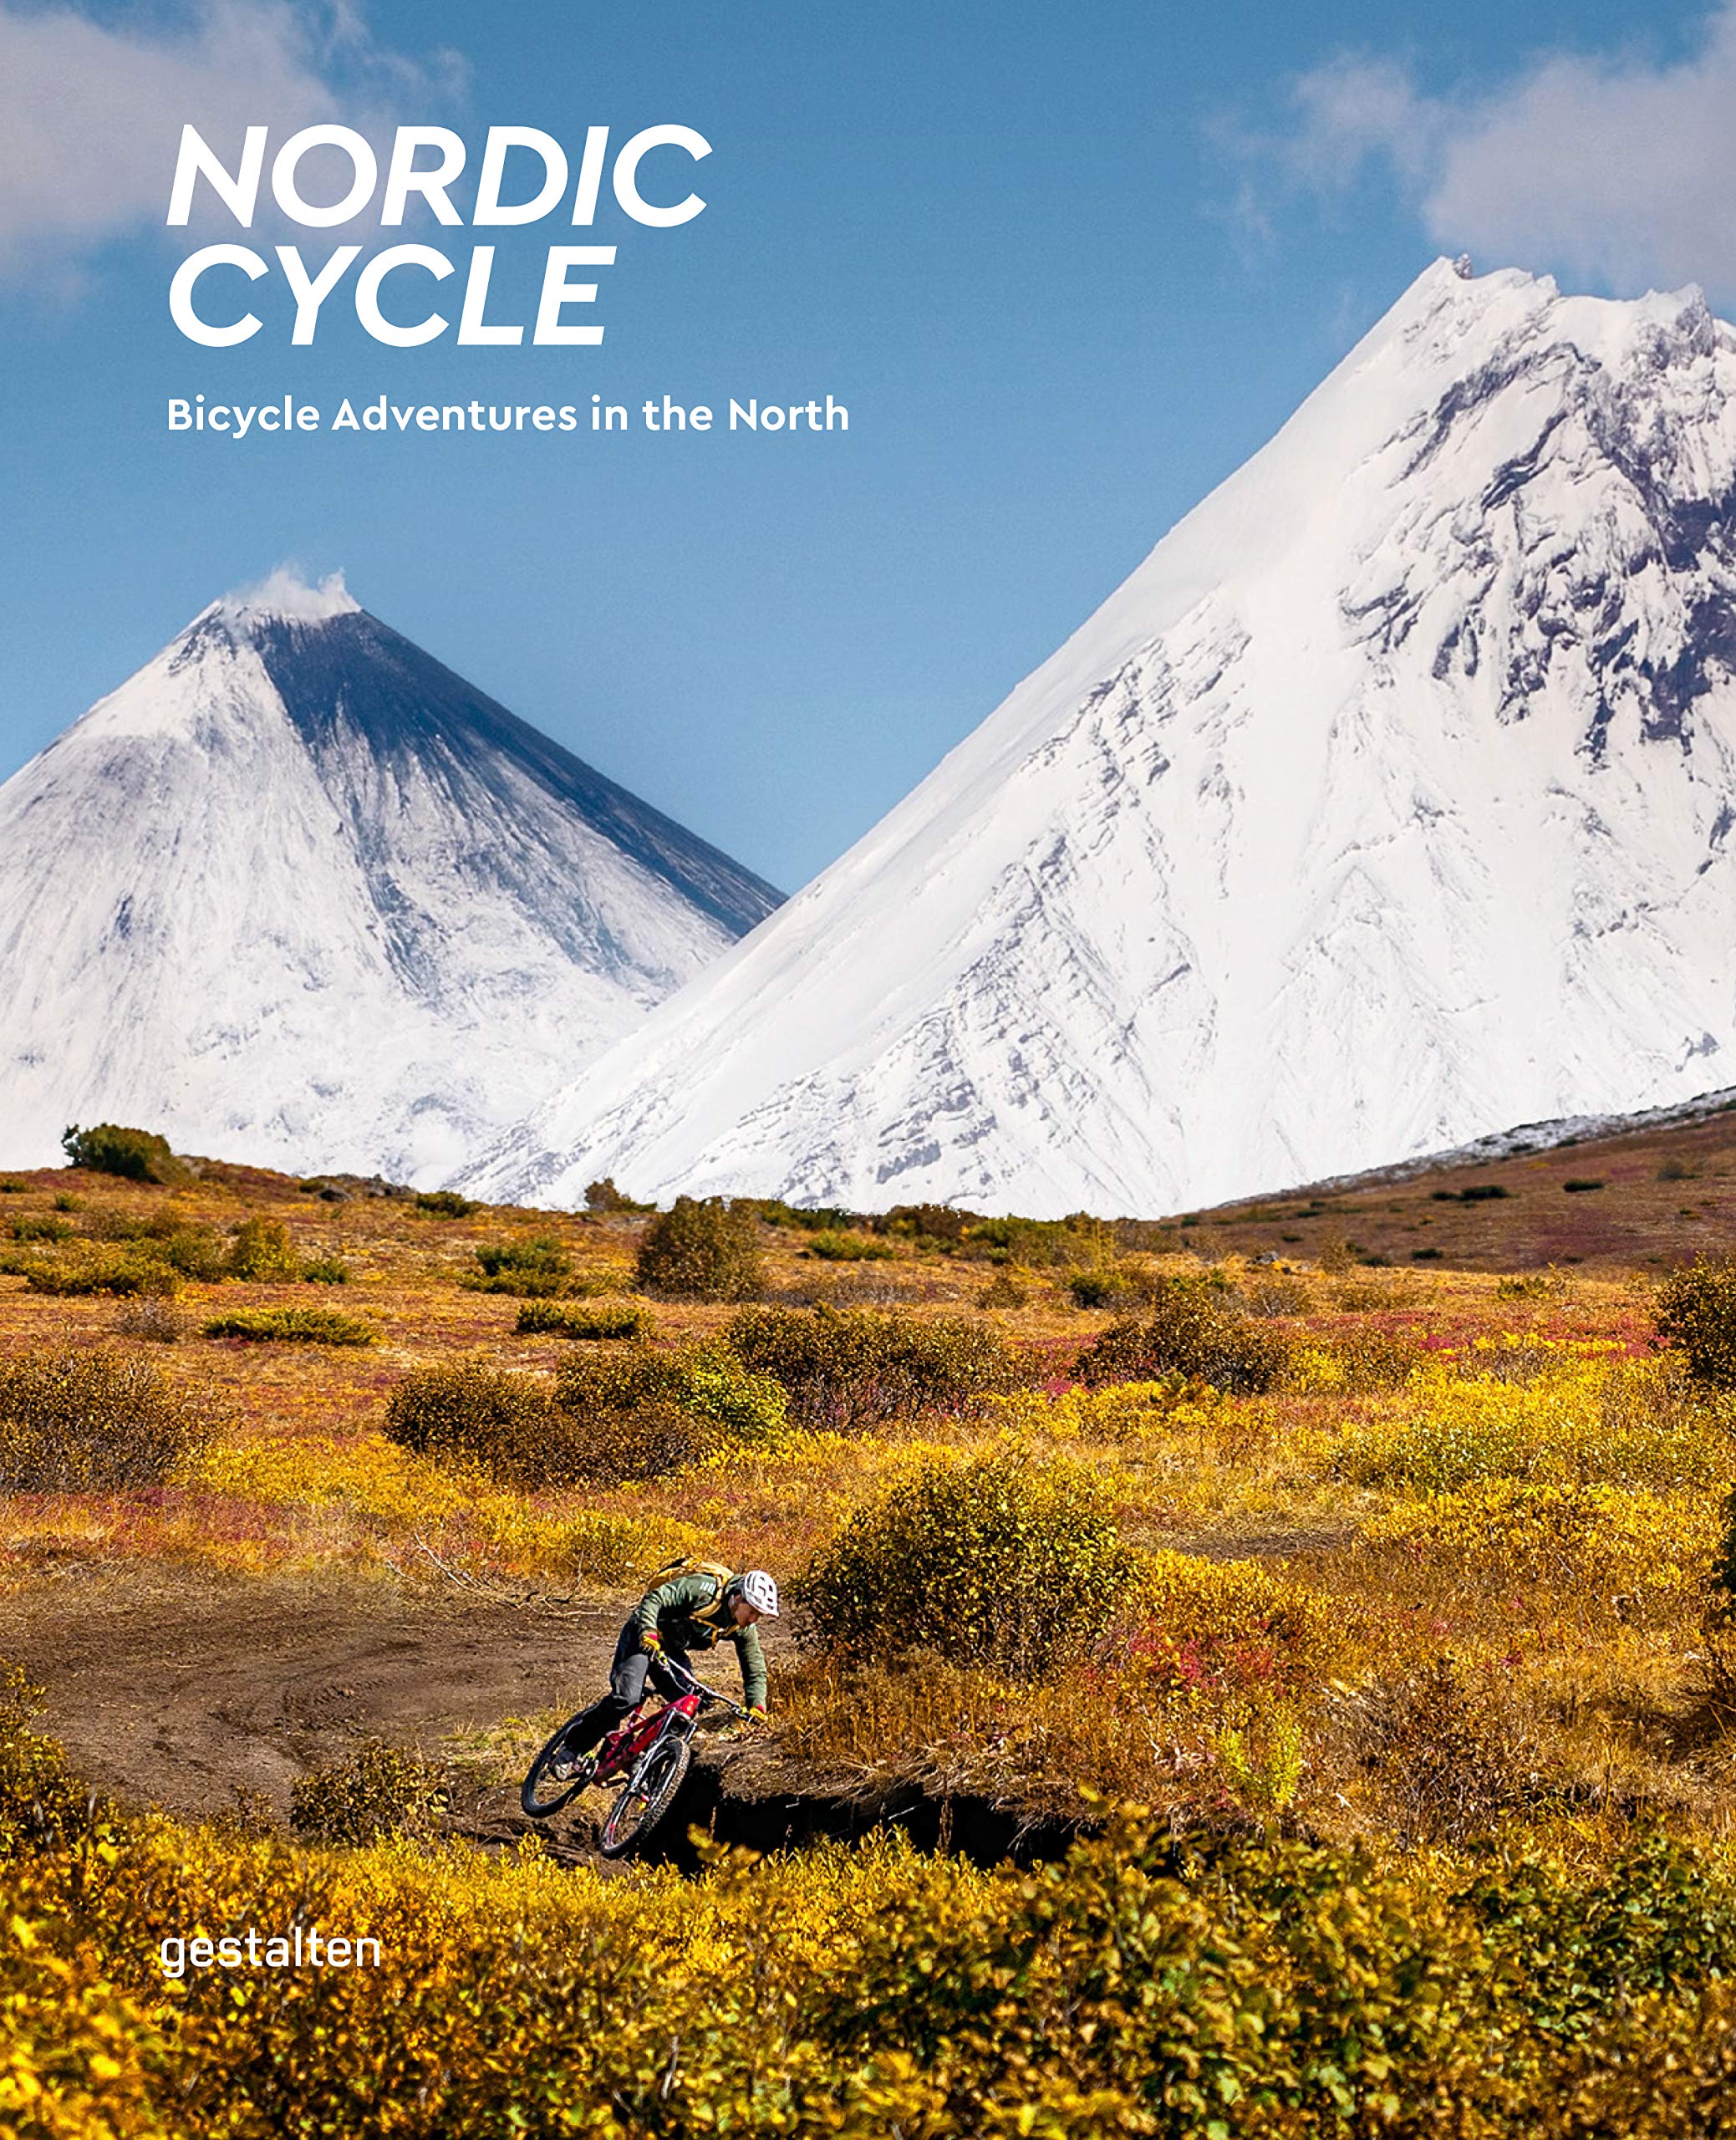 NORDIC CYCLE: BICYCLE ADVENTURES IN THE NORTH